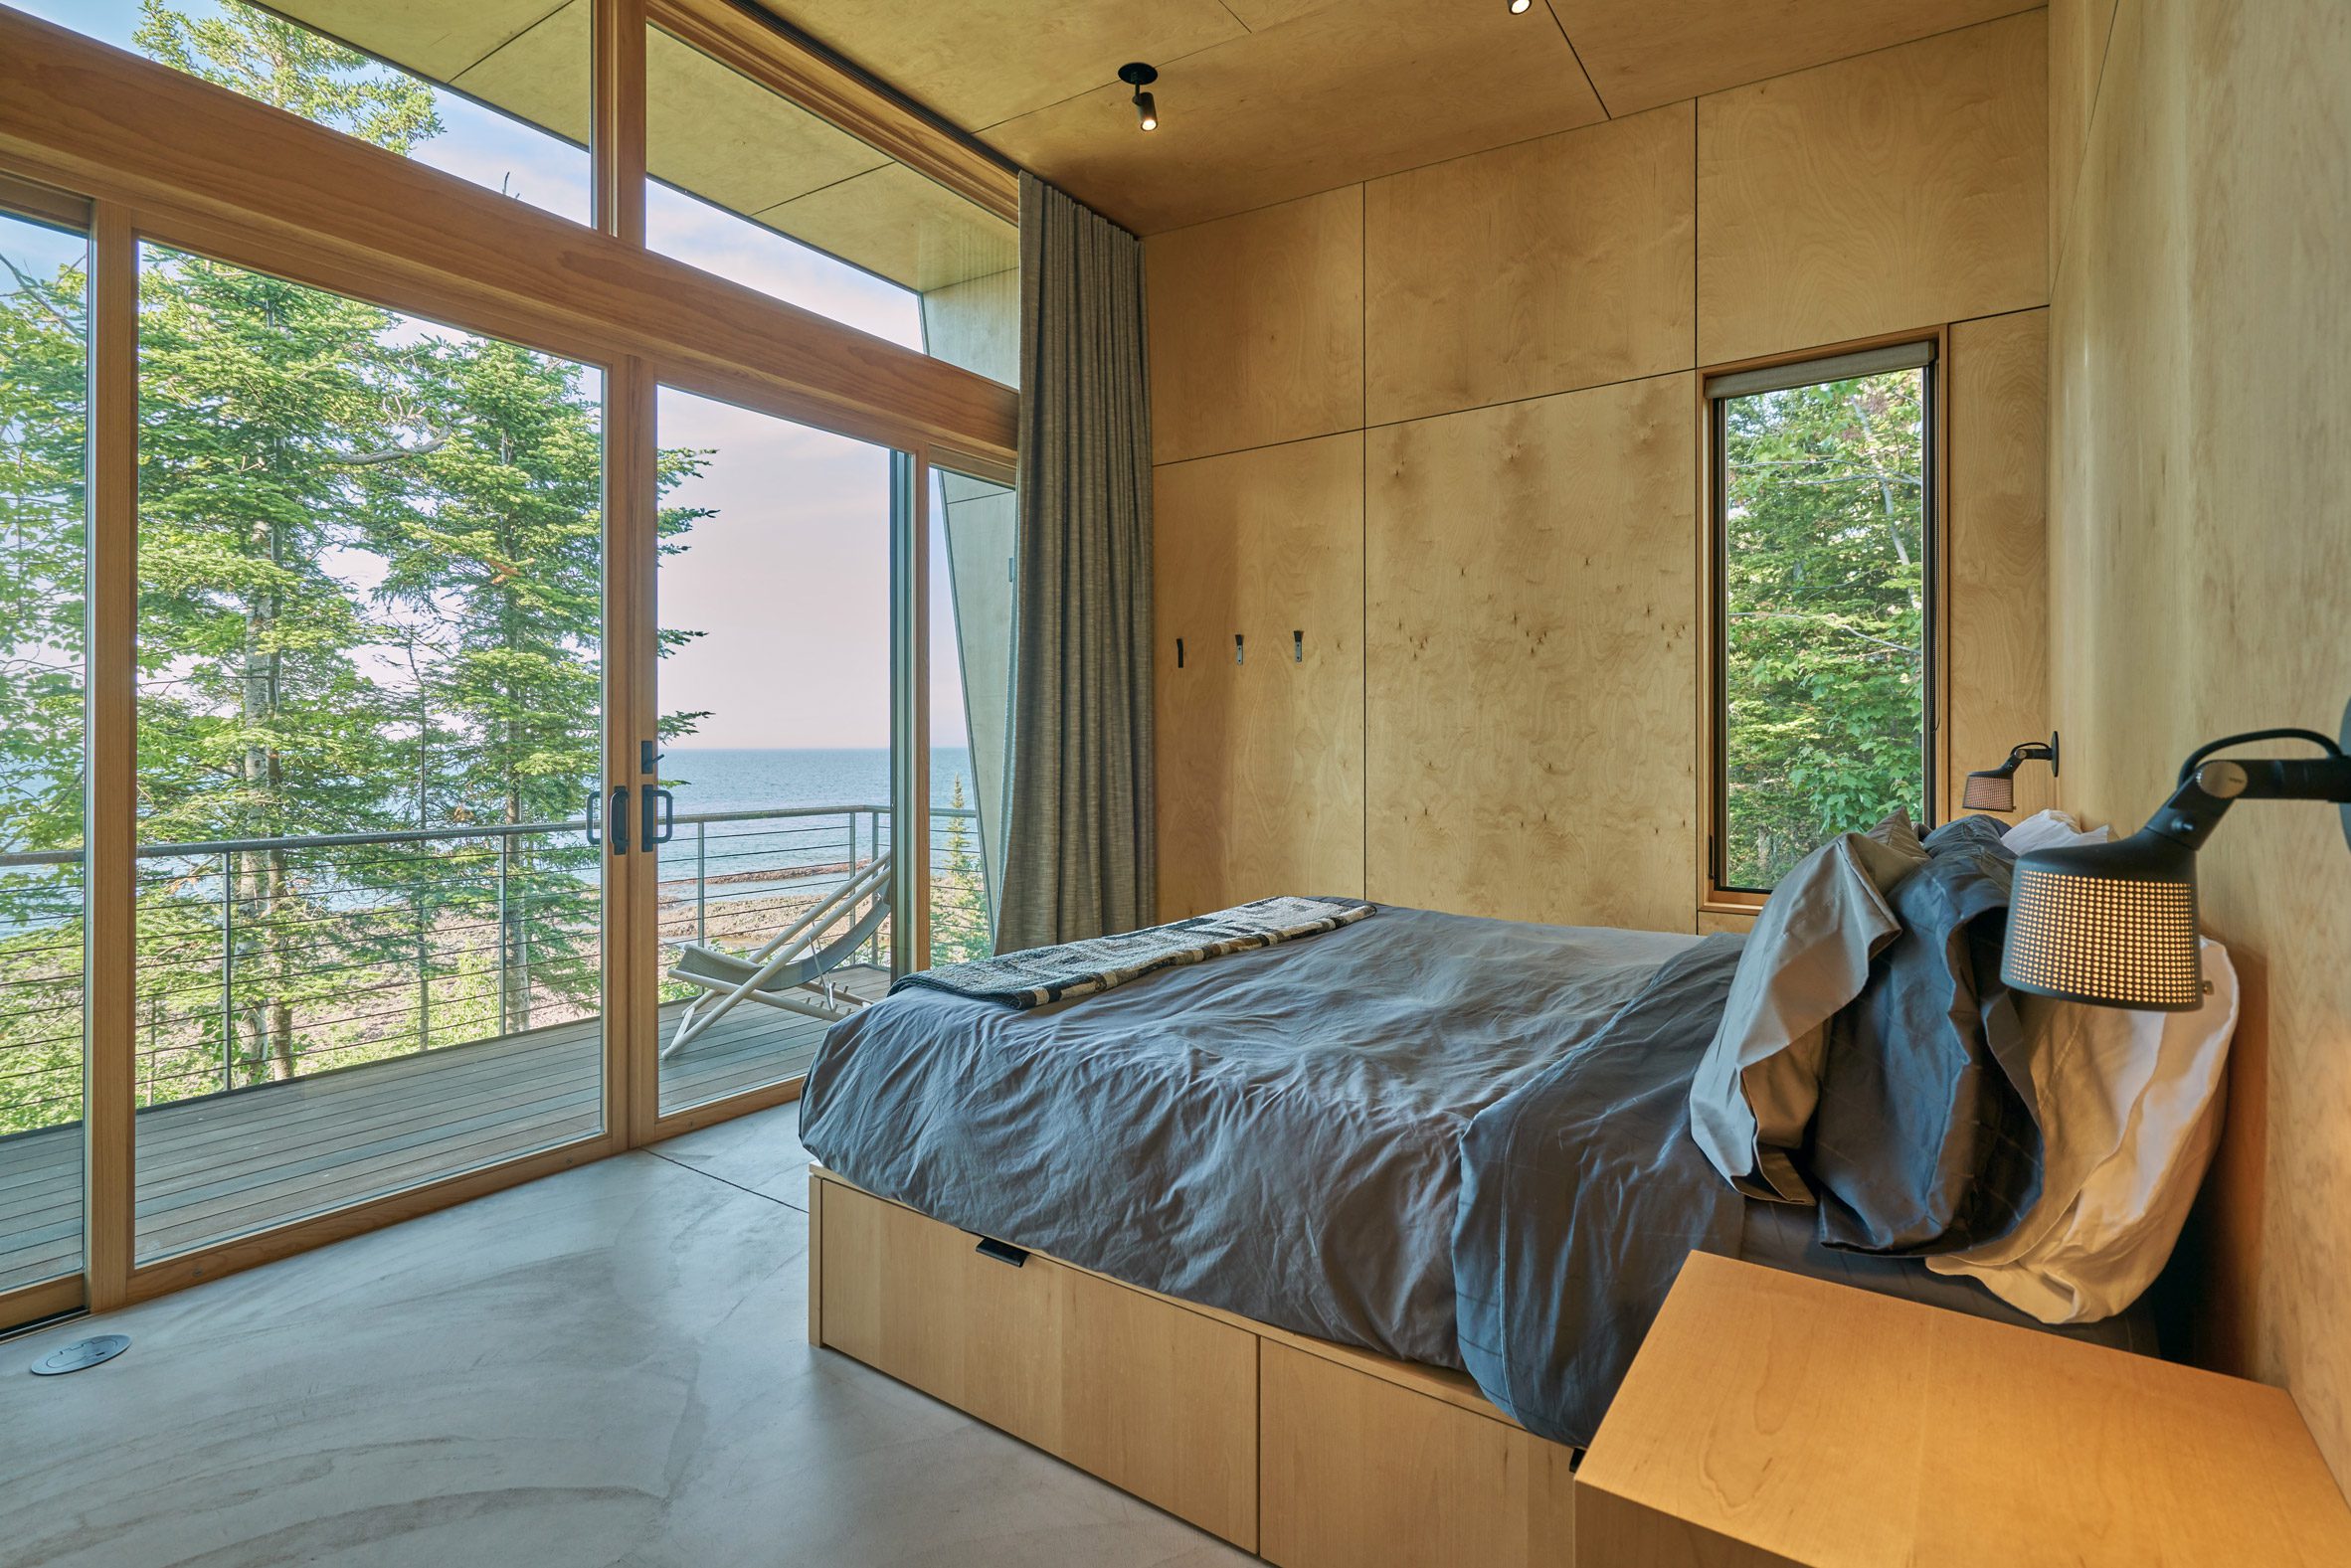 A bedroom with wood paneled walls